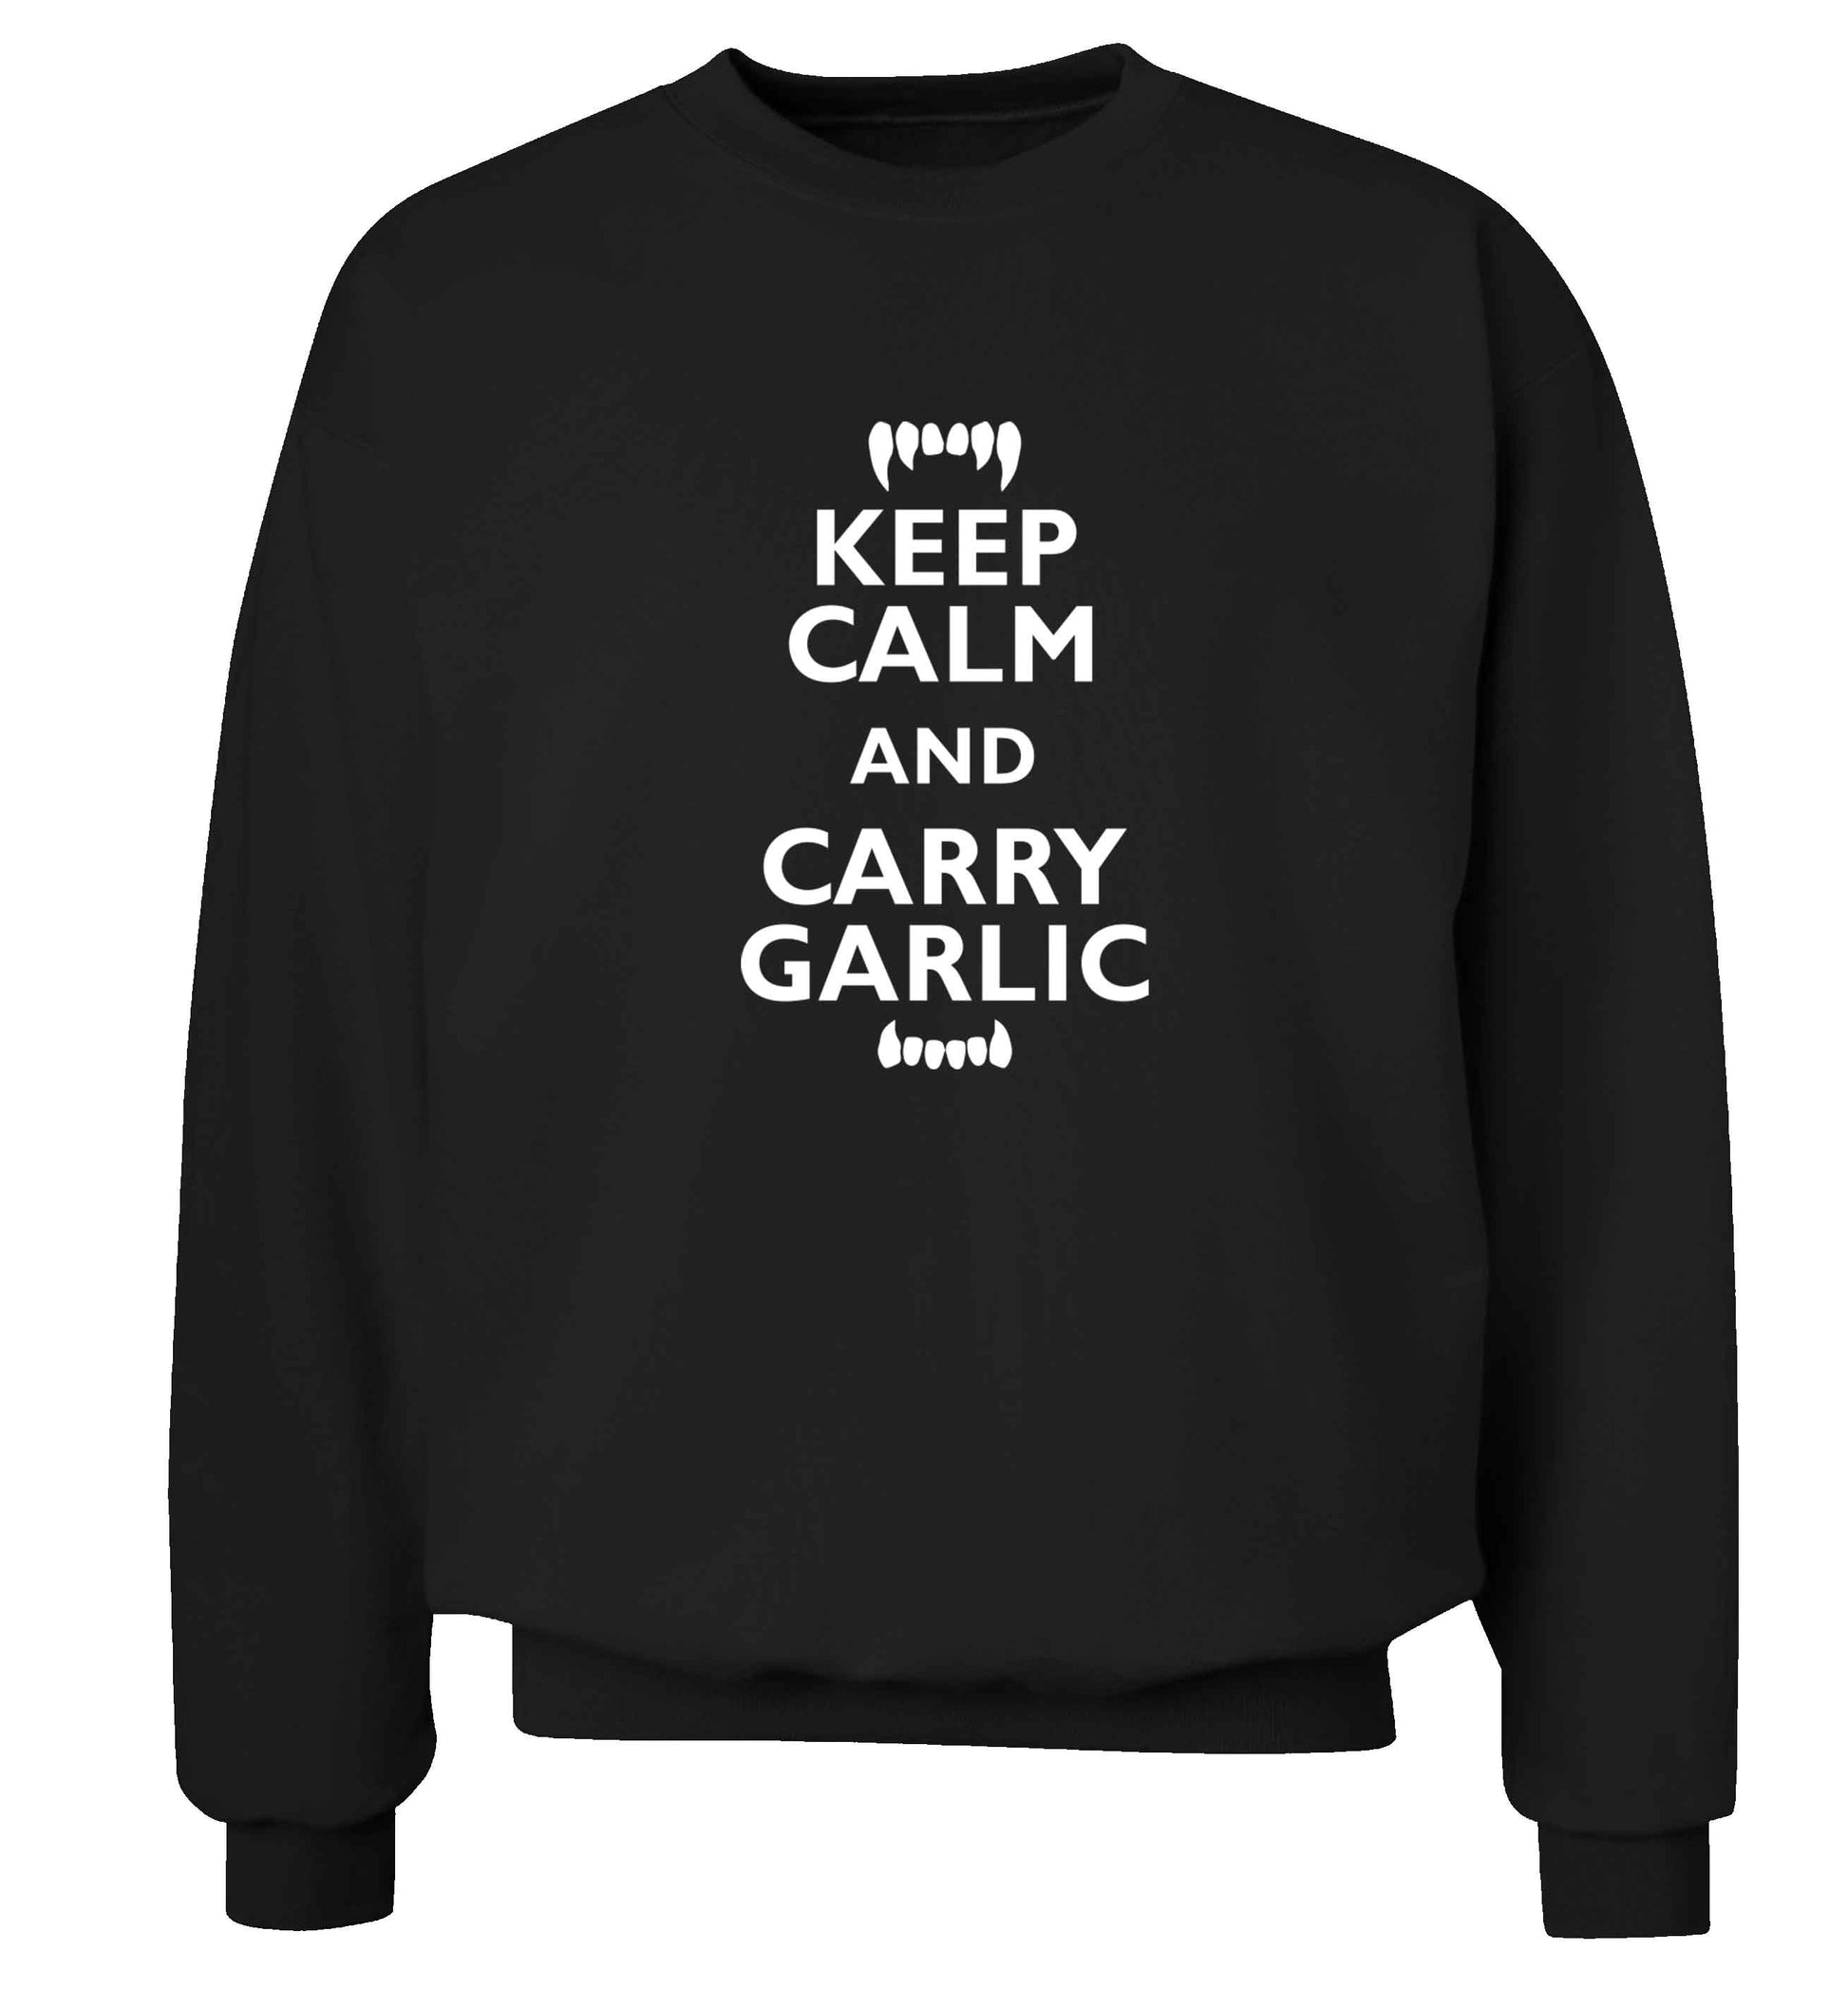 Keep calm and carry garlic adult's unisex black sweater 2XL